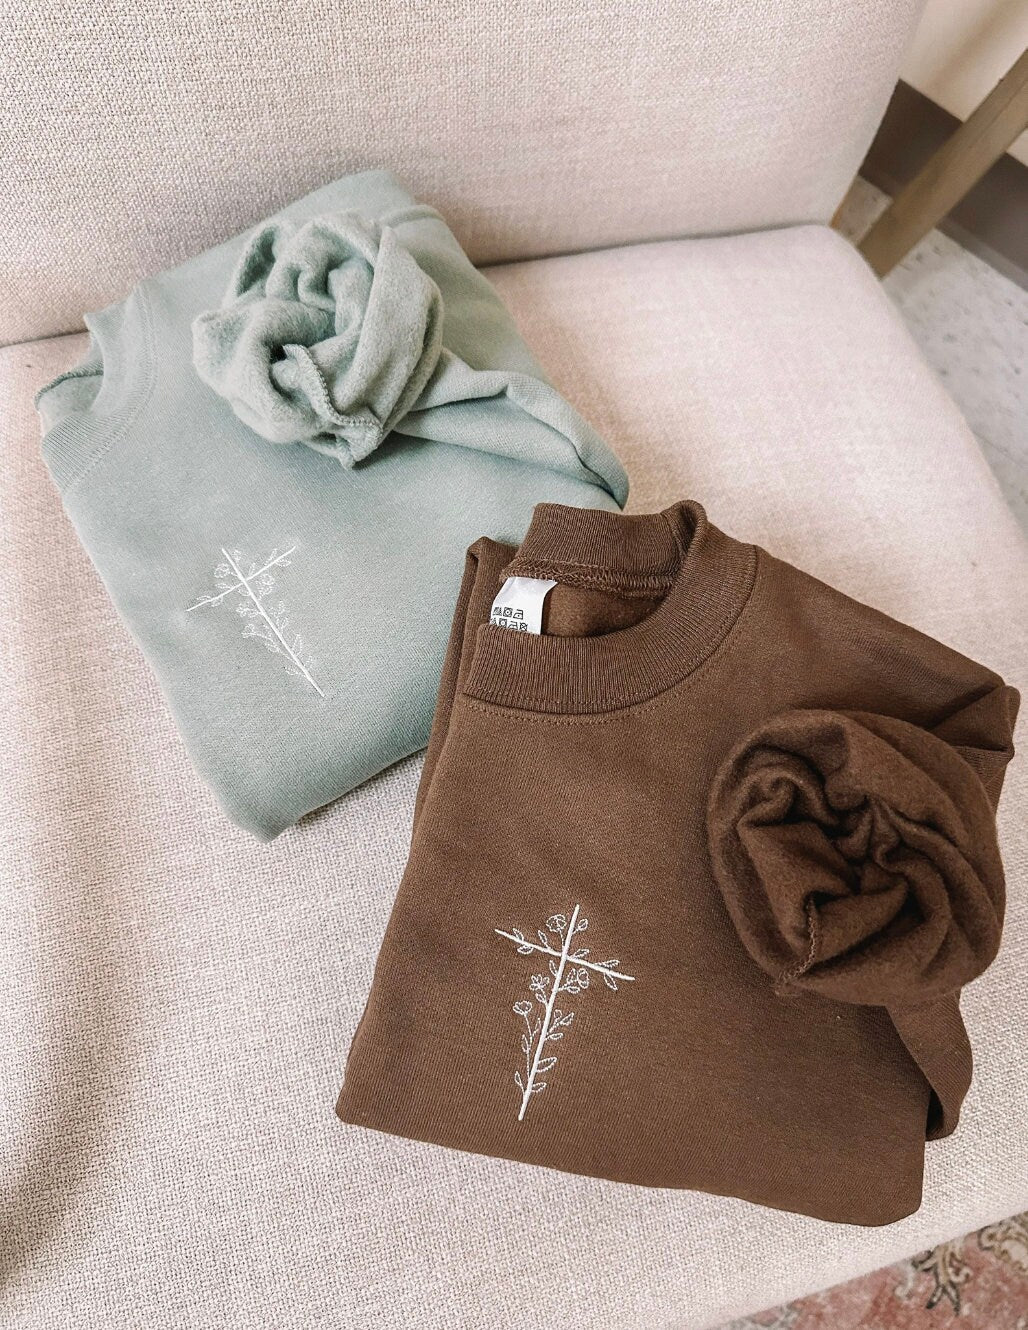 Embroidered Floral Cross Sweatshirt